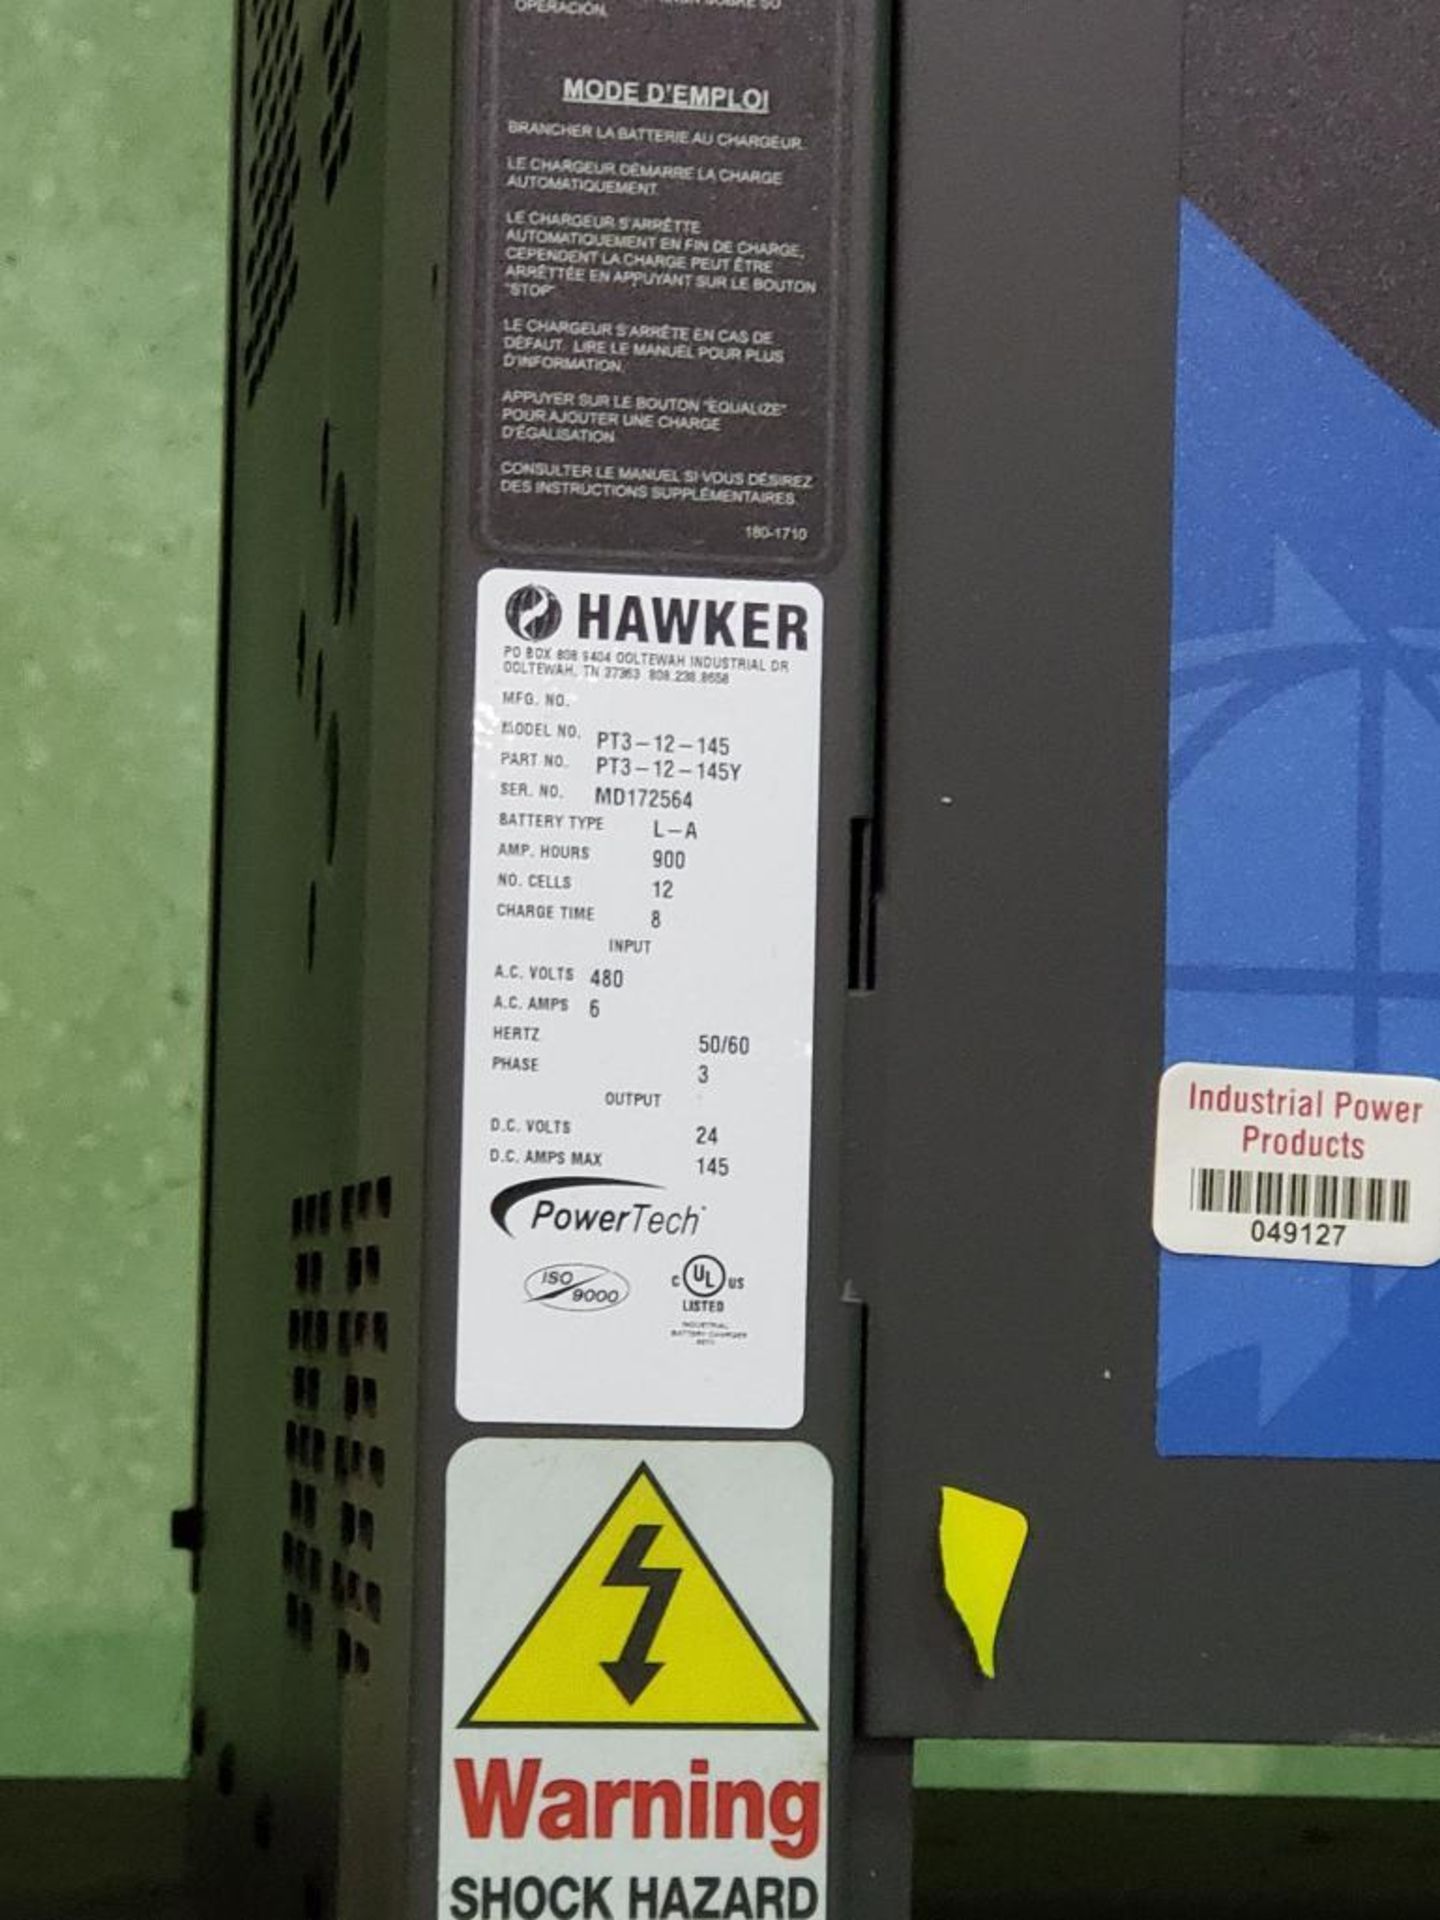 Hawker Powertech 24V Forklift Battery Charger, Model PT3-12-145, 145 DC Max. Output - Image 3 of 3